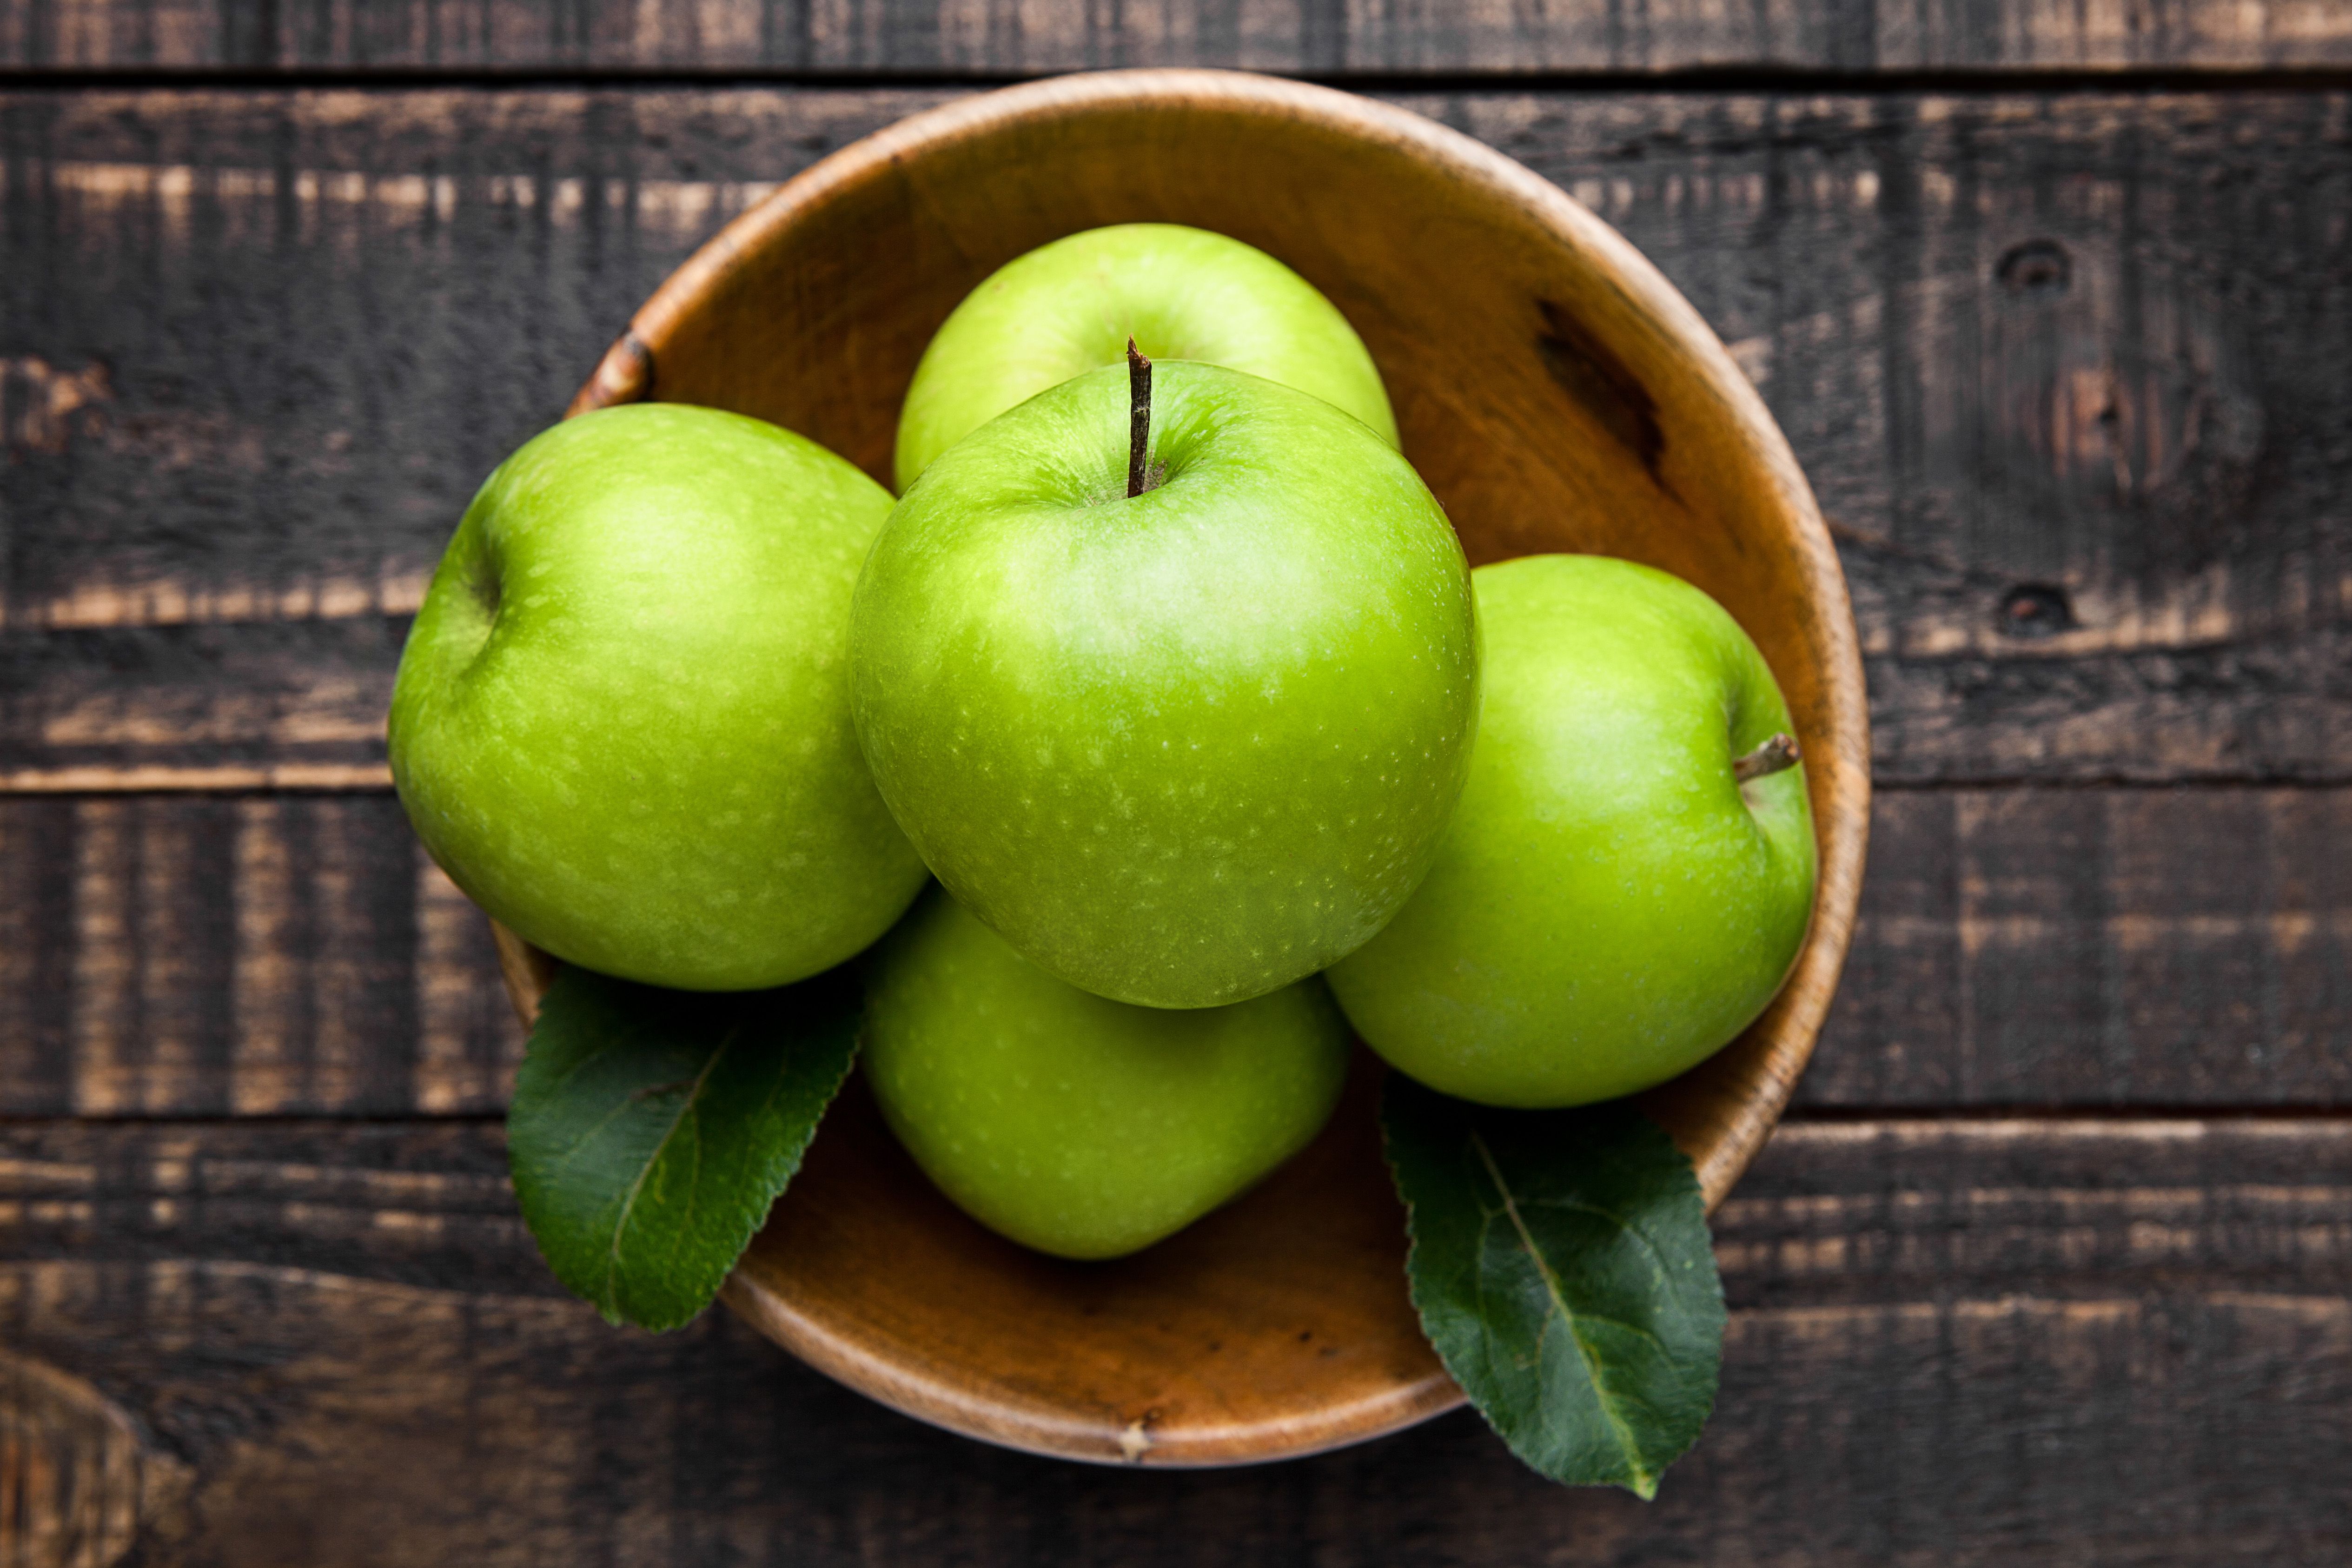 Granny Smith - Good Fruit Guide